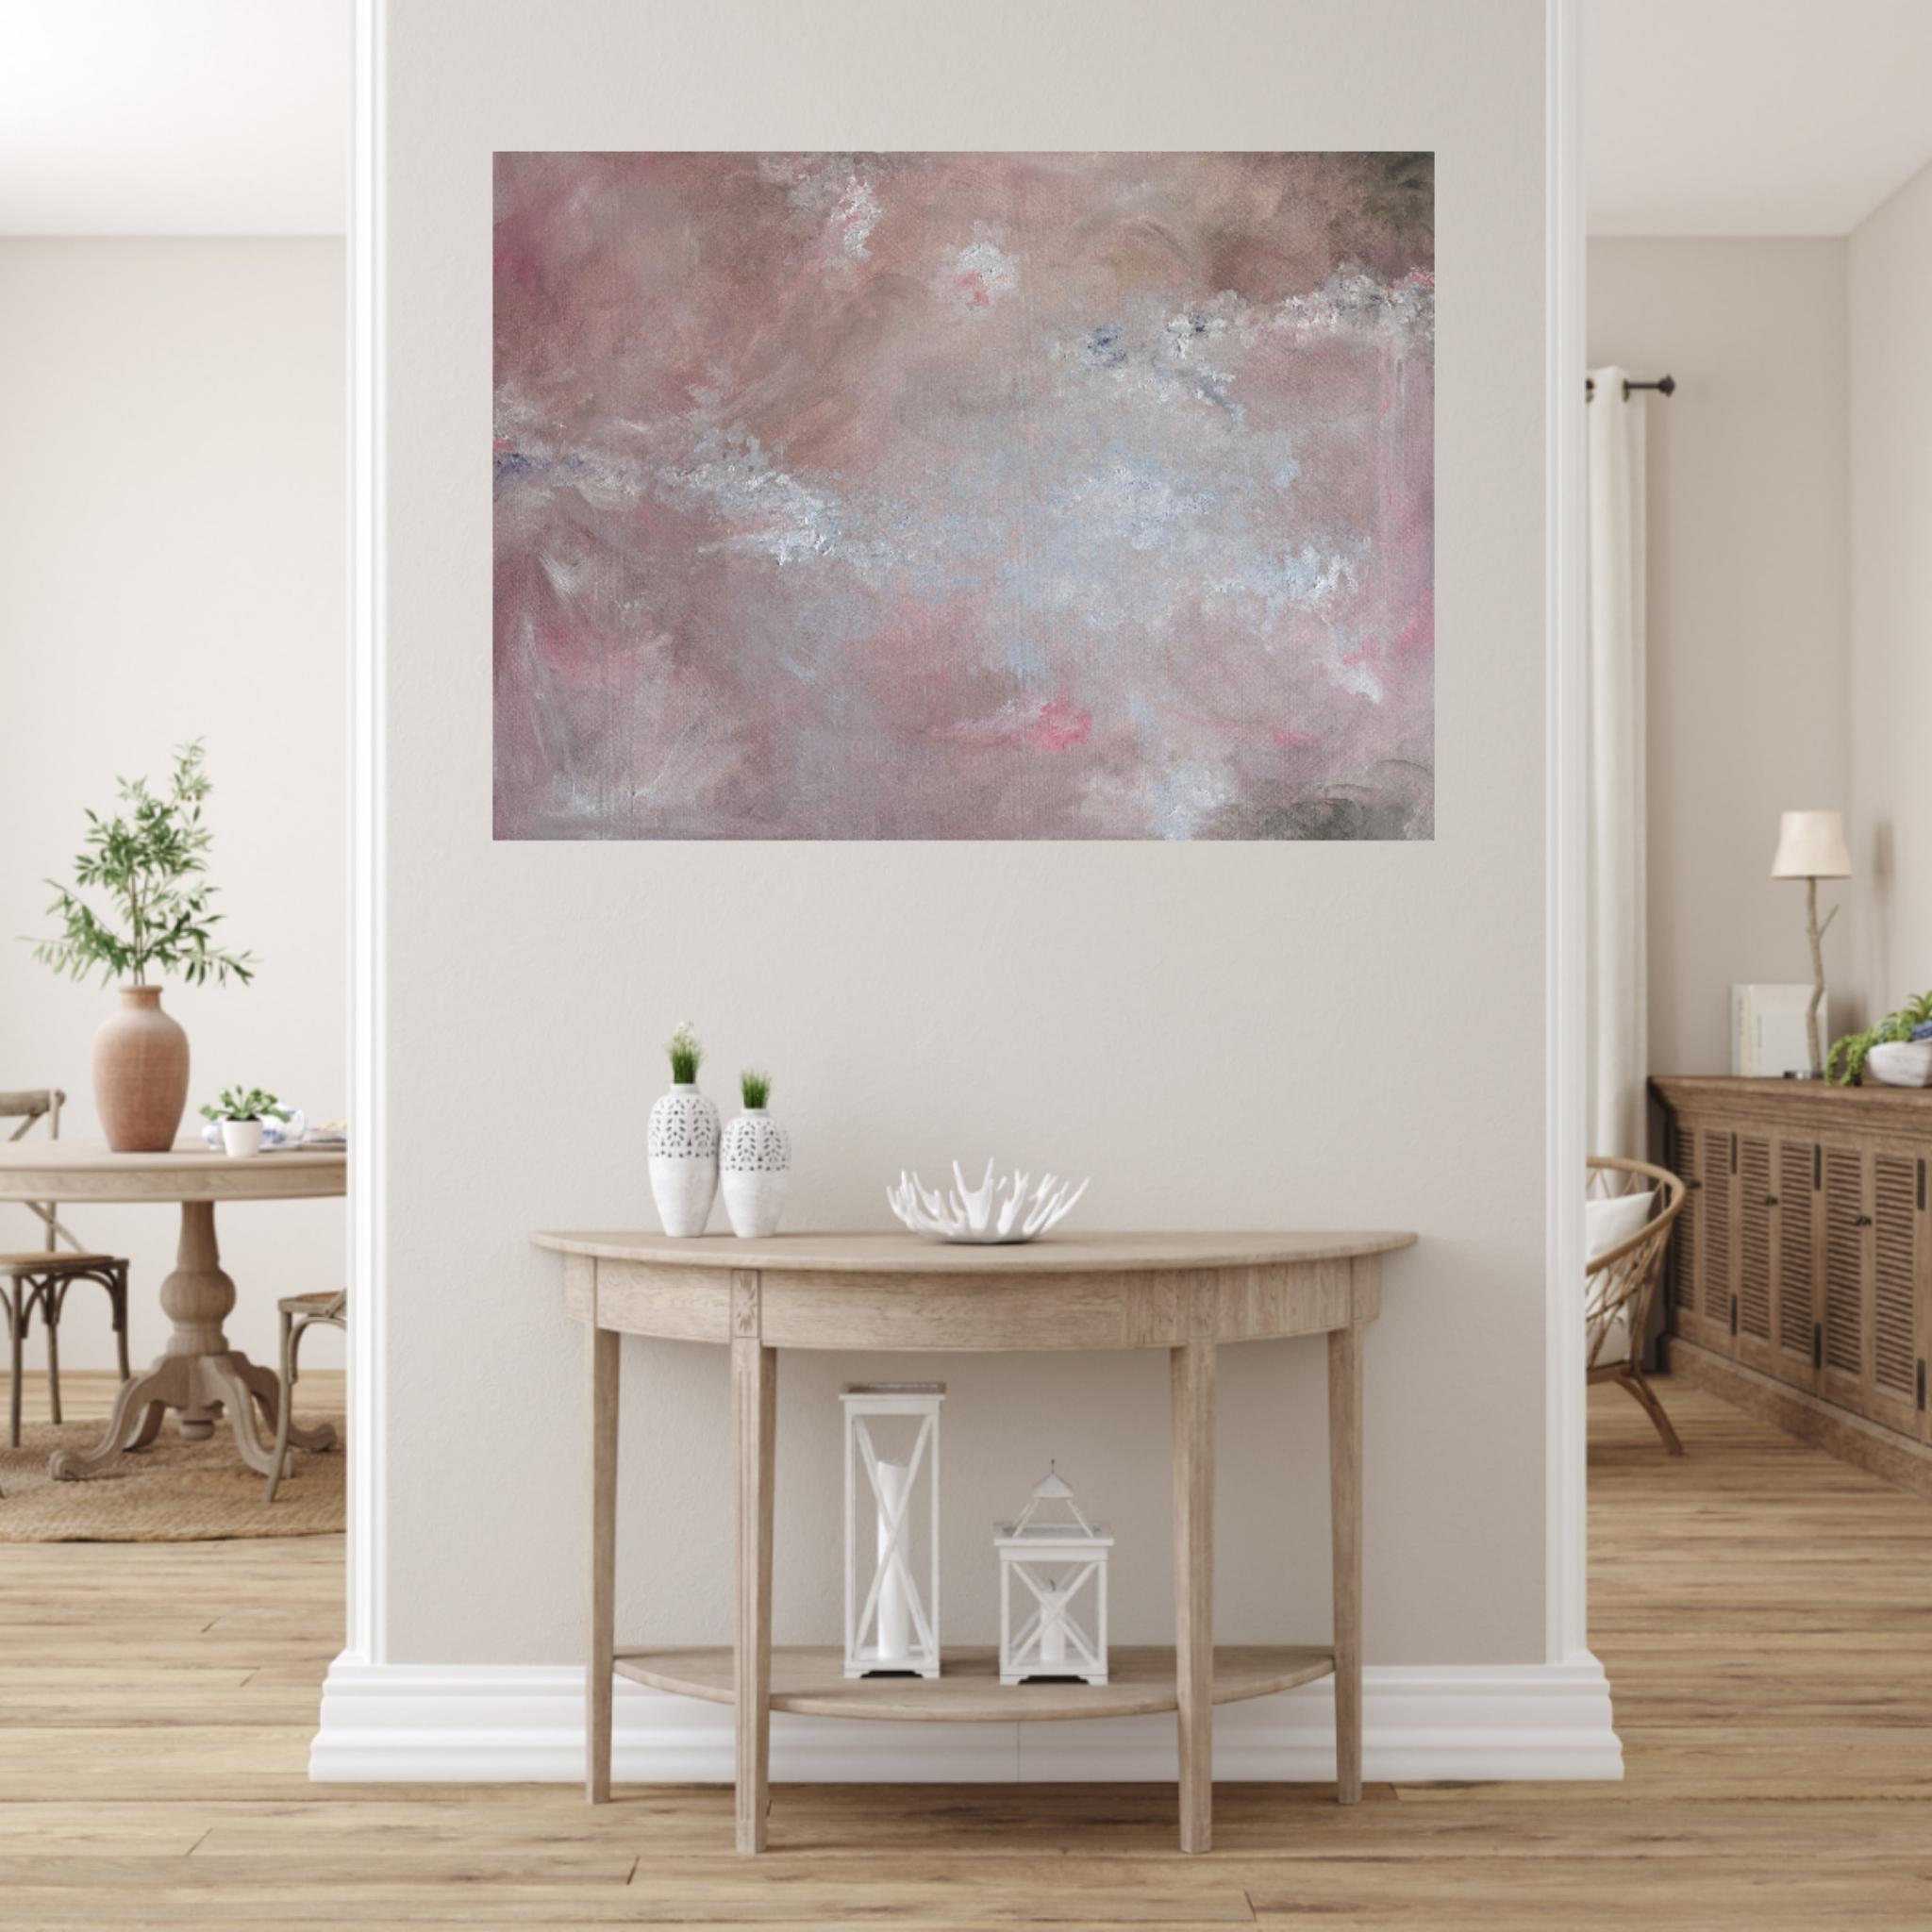 Piccolo grande amore - Soft abstract floral painting 1